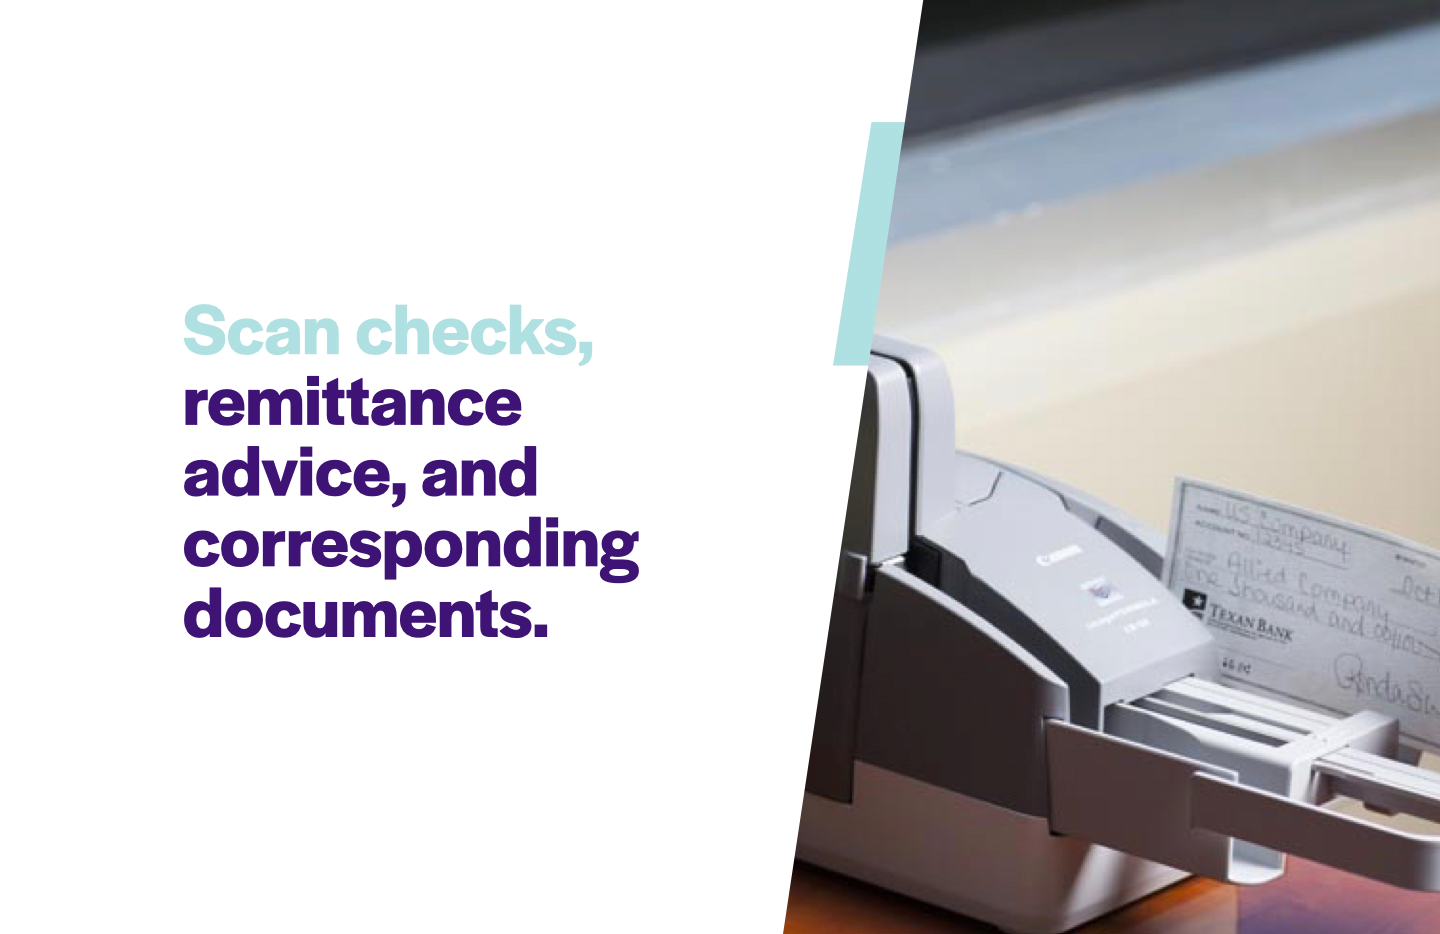 No more tedious tasks: Reduce your check processing time from 3 minutes to just a few seconds.